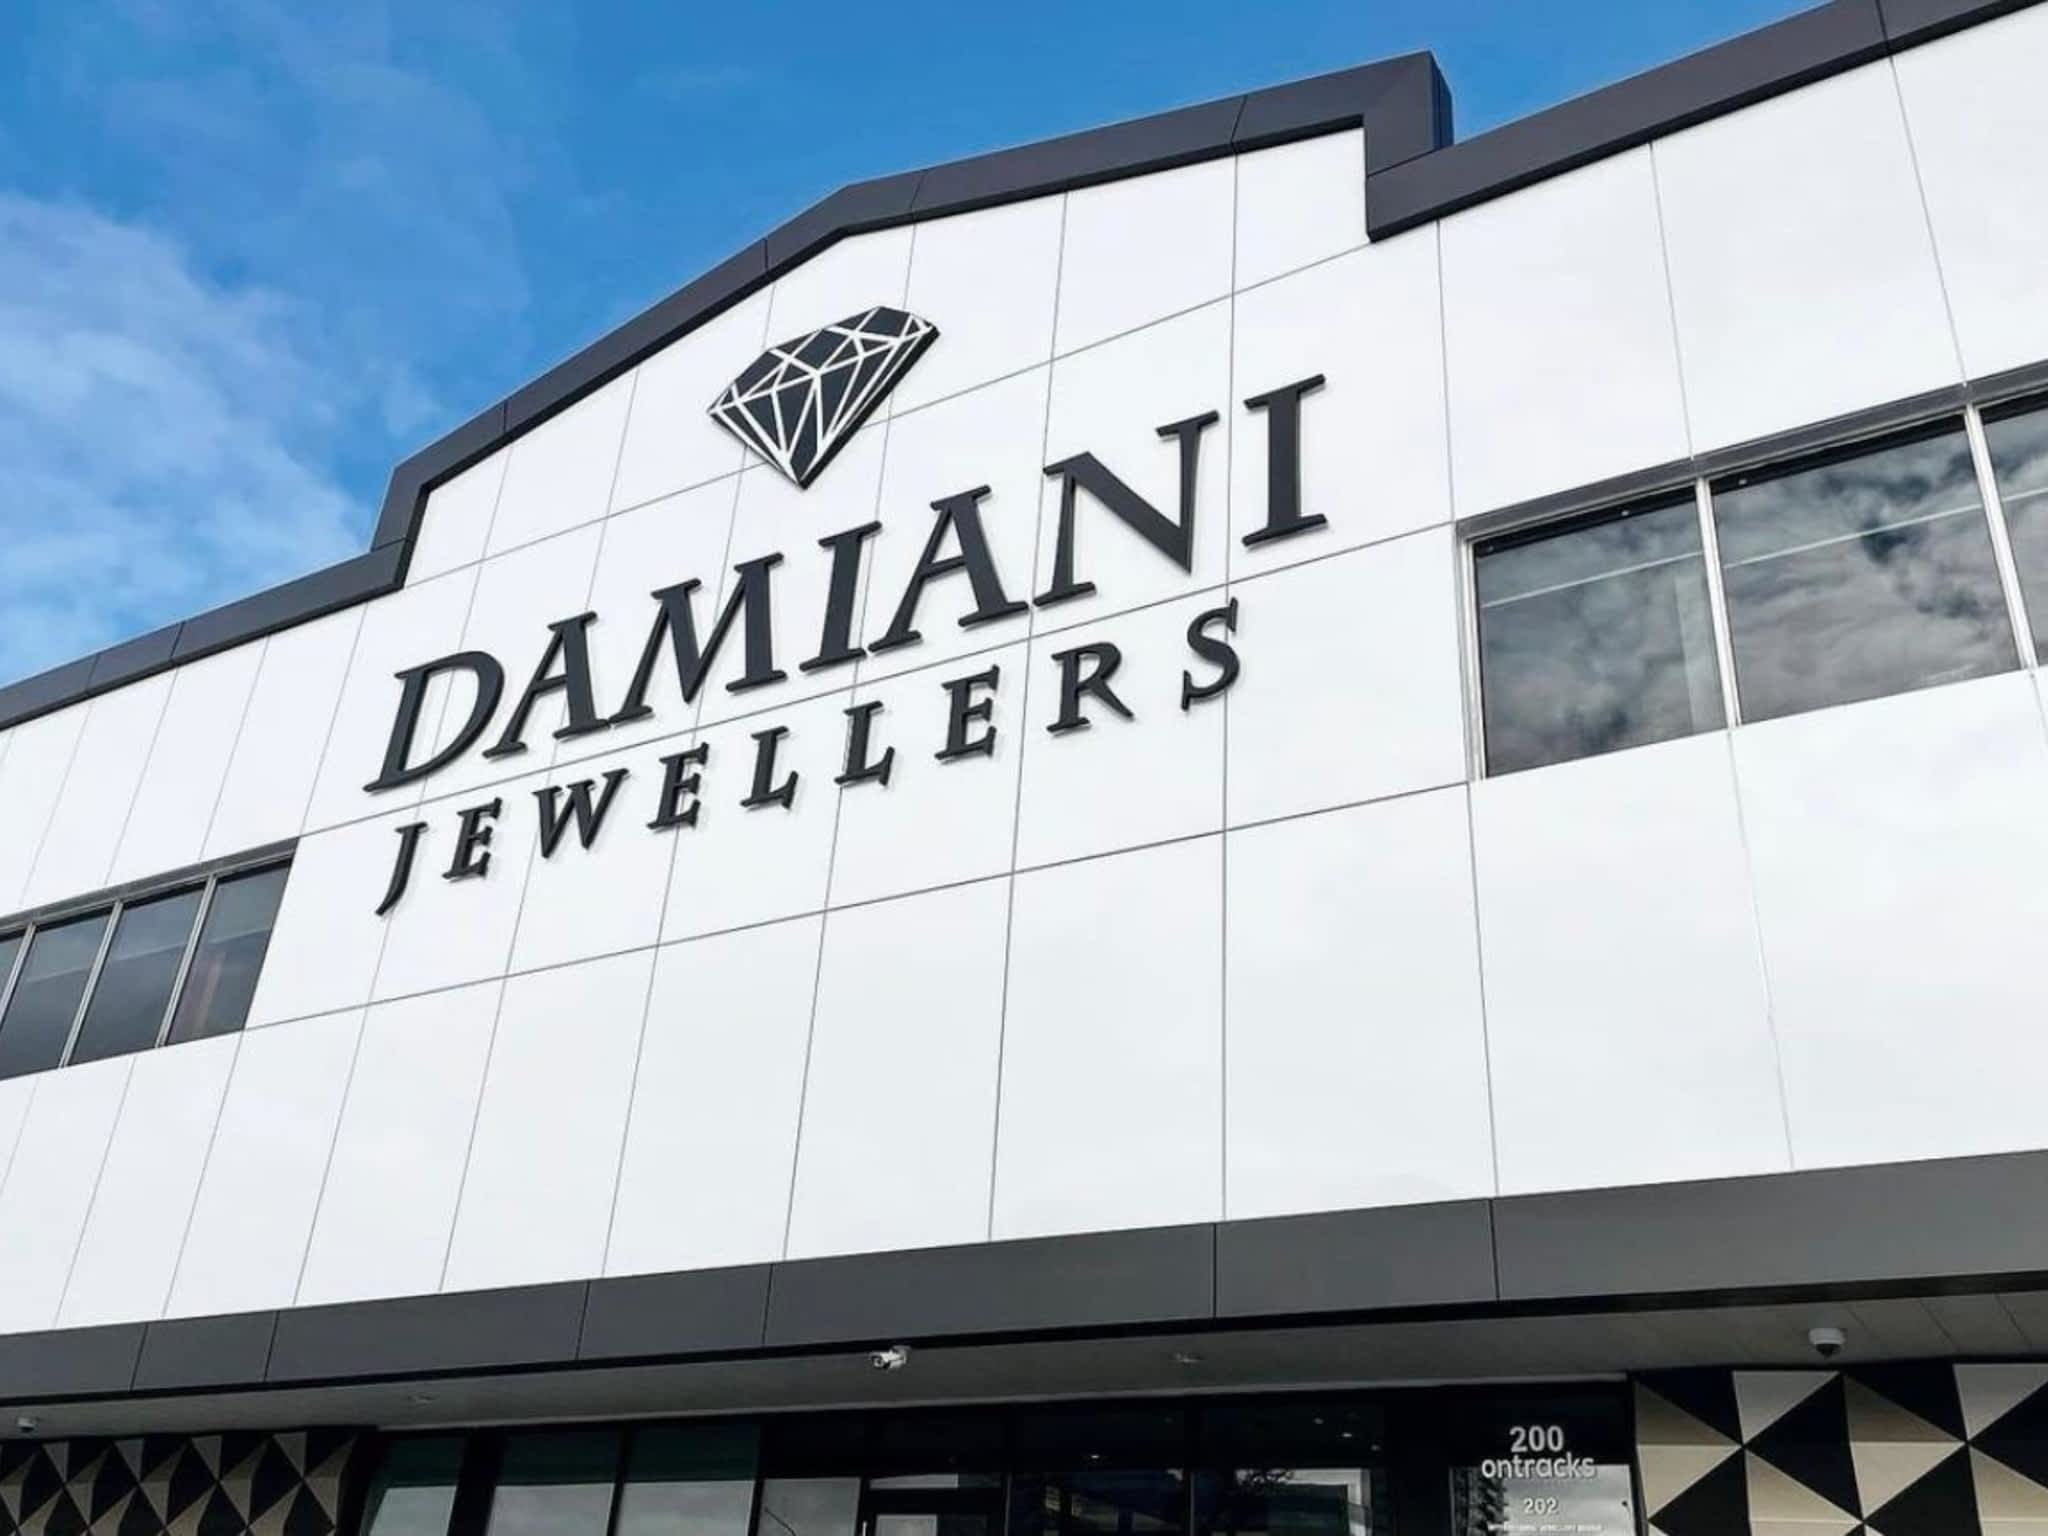 photo ?Damiani Jewellers? - Official Rolex Retailer